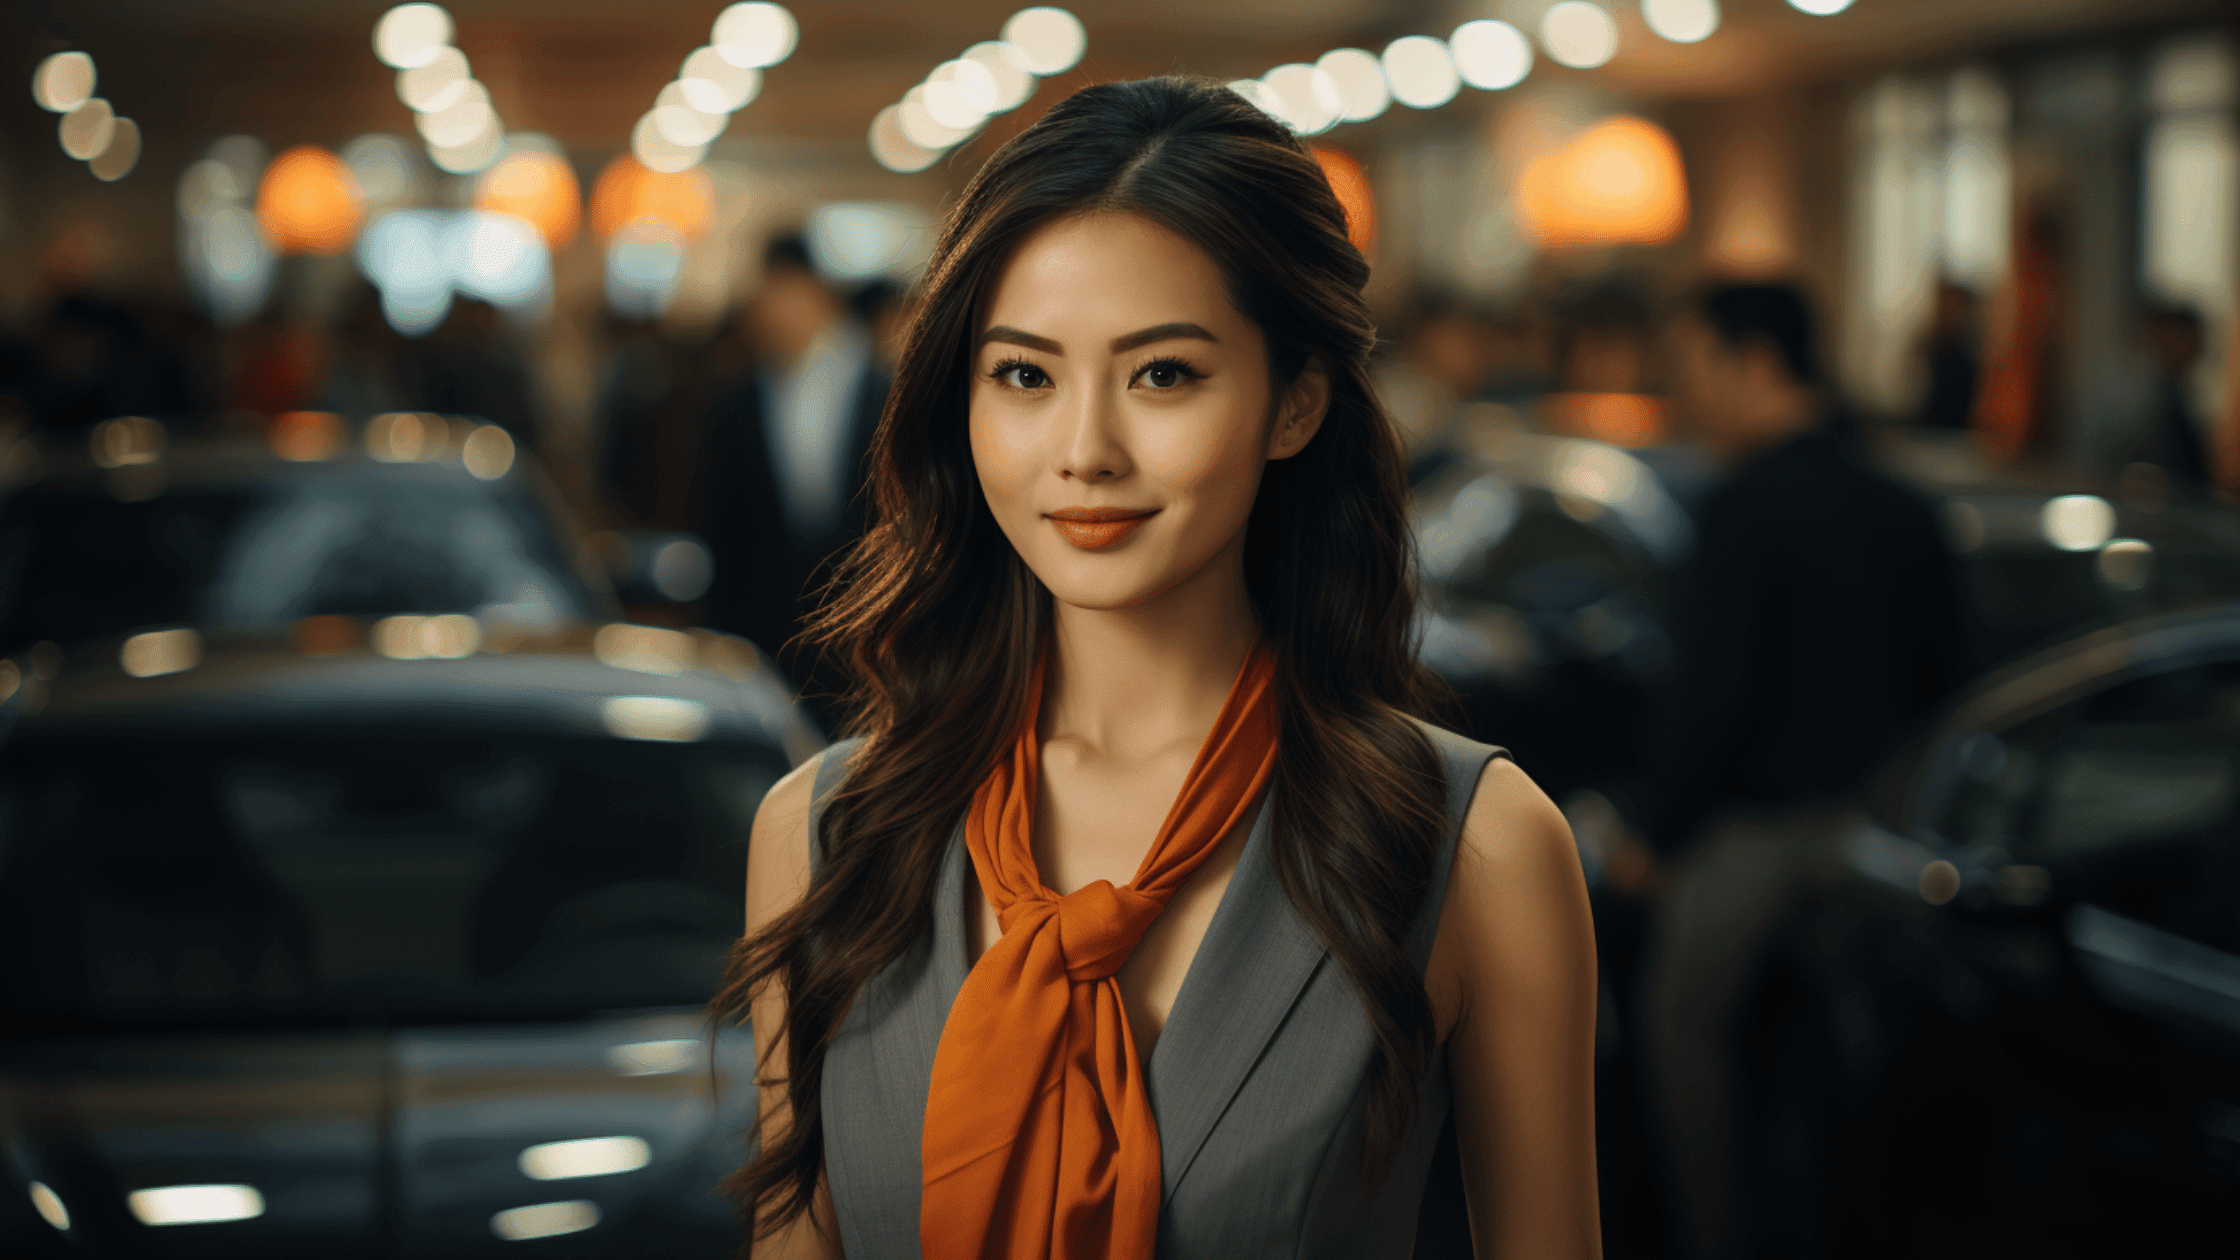 An Asian girl stands beside her newly purchased car, holding the keys in her hand, with a radiant smile on her face. She is captured in soft, natural daylight, and the image is shot in a photorealistic style.